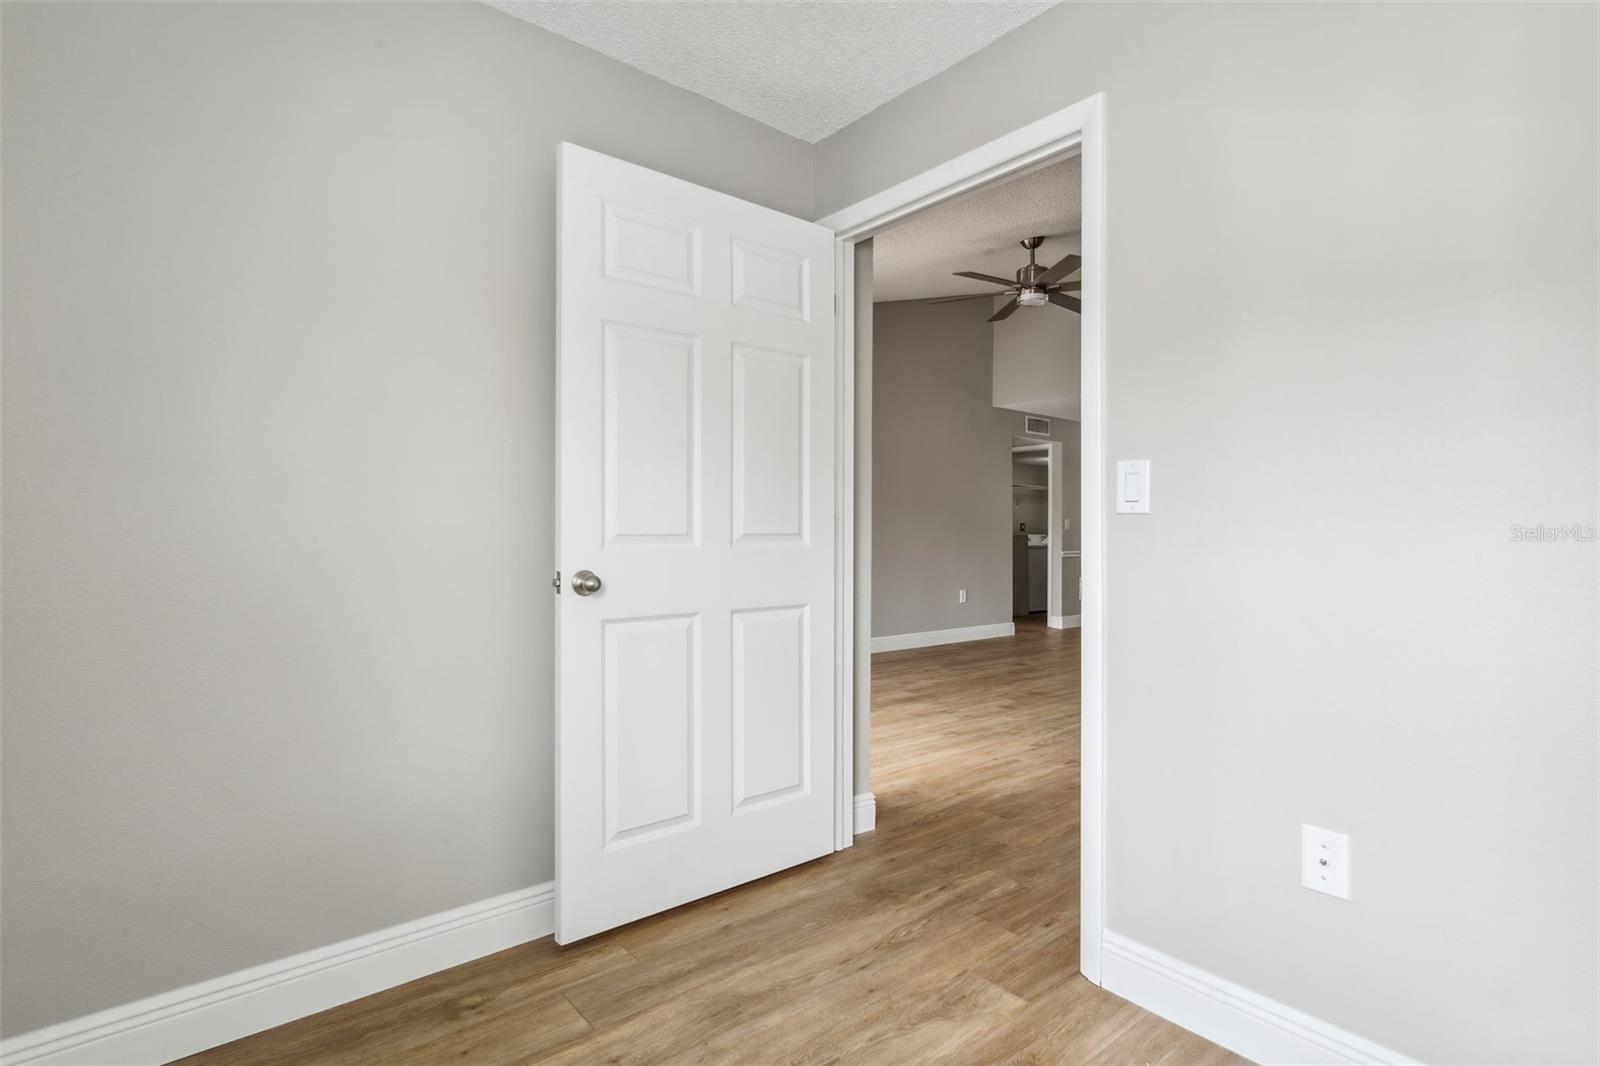 Door to the flex room is a private space to use how it suits your lifestyle.